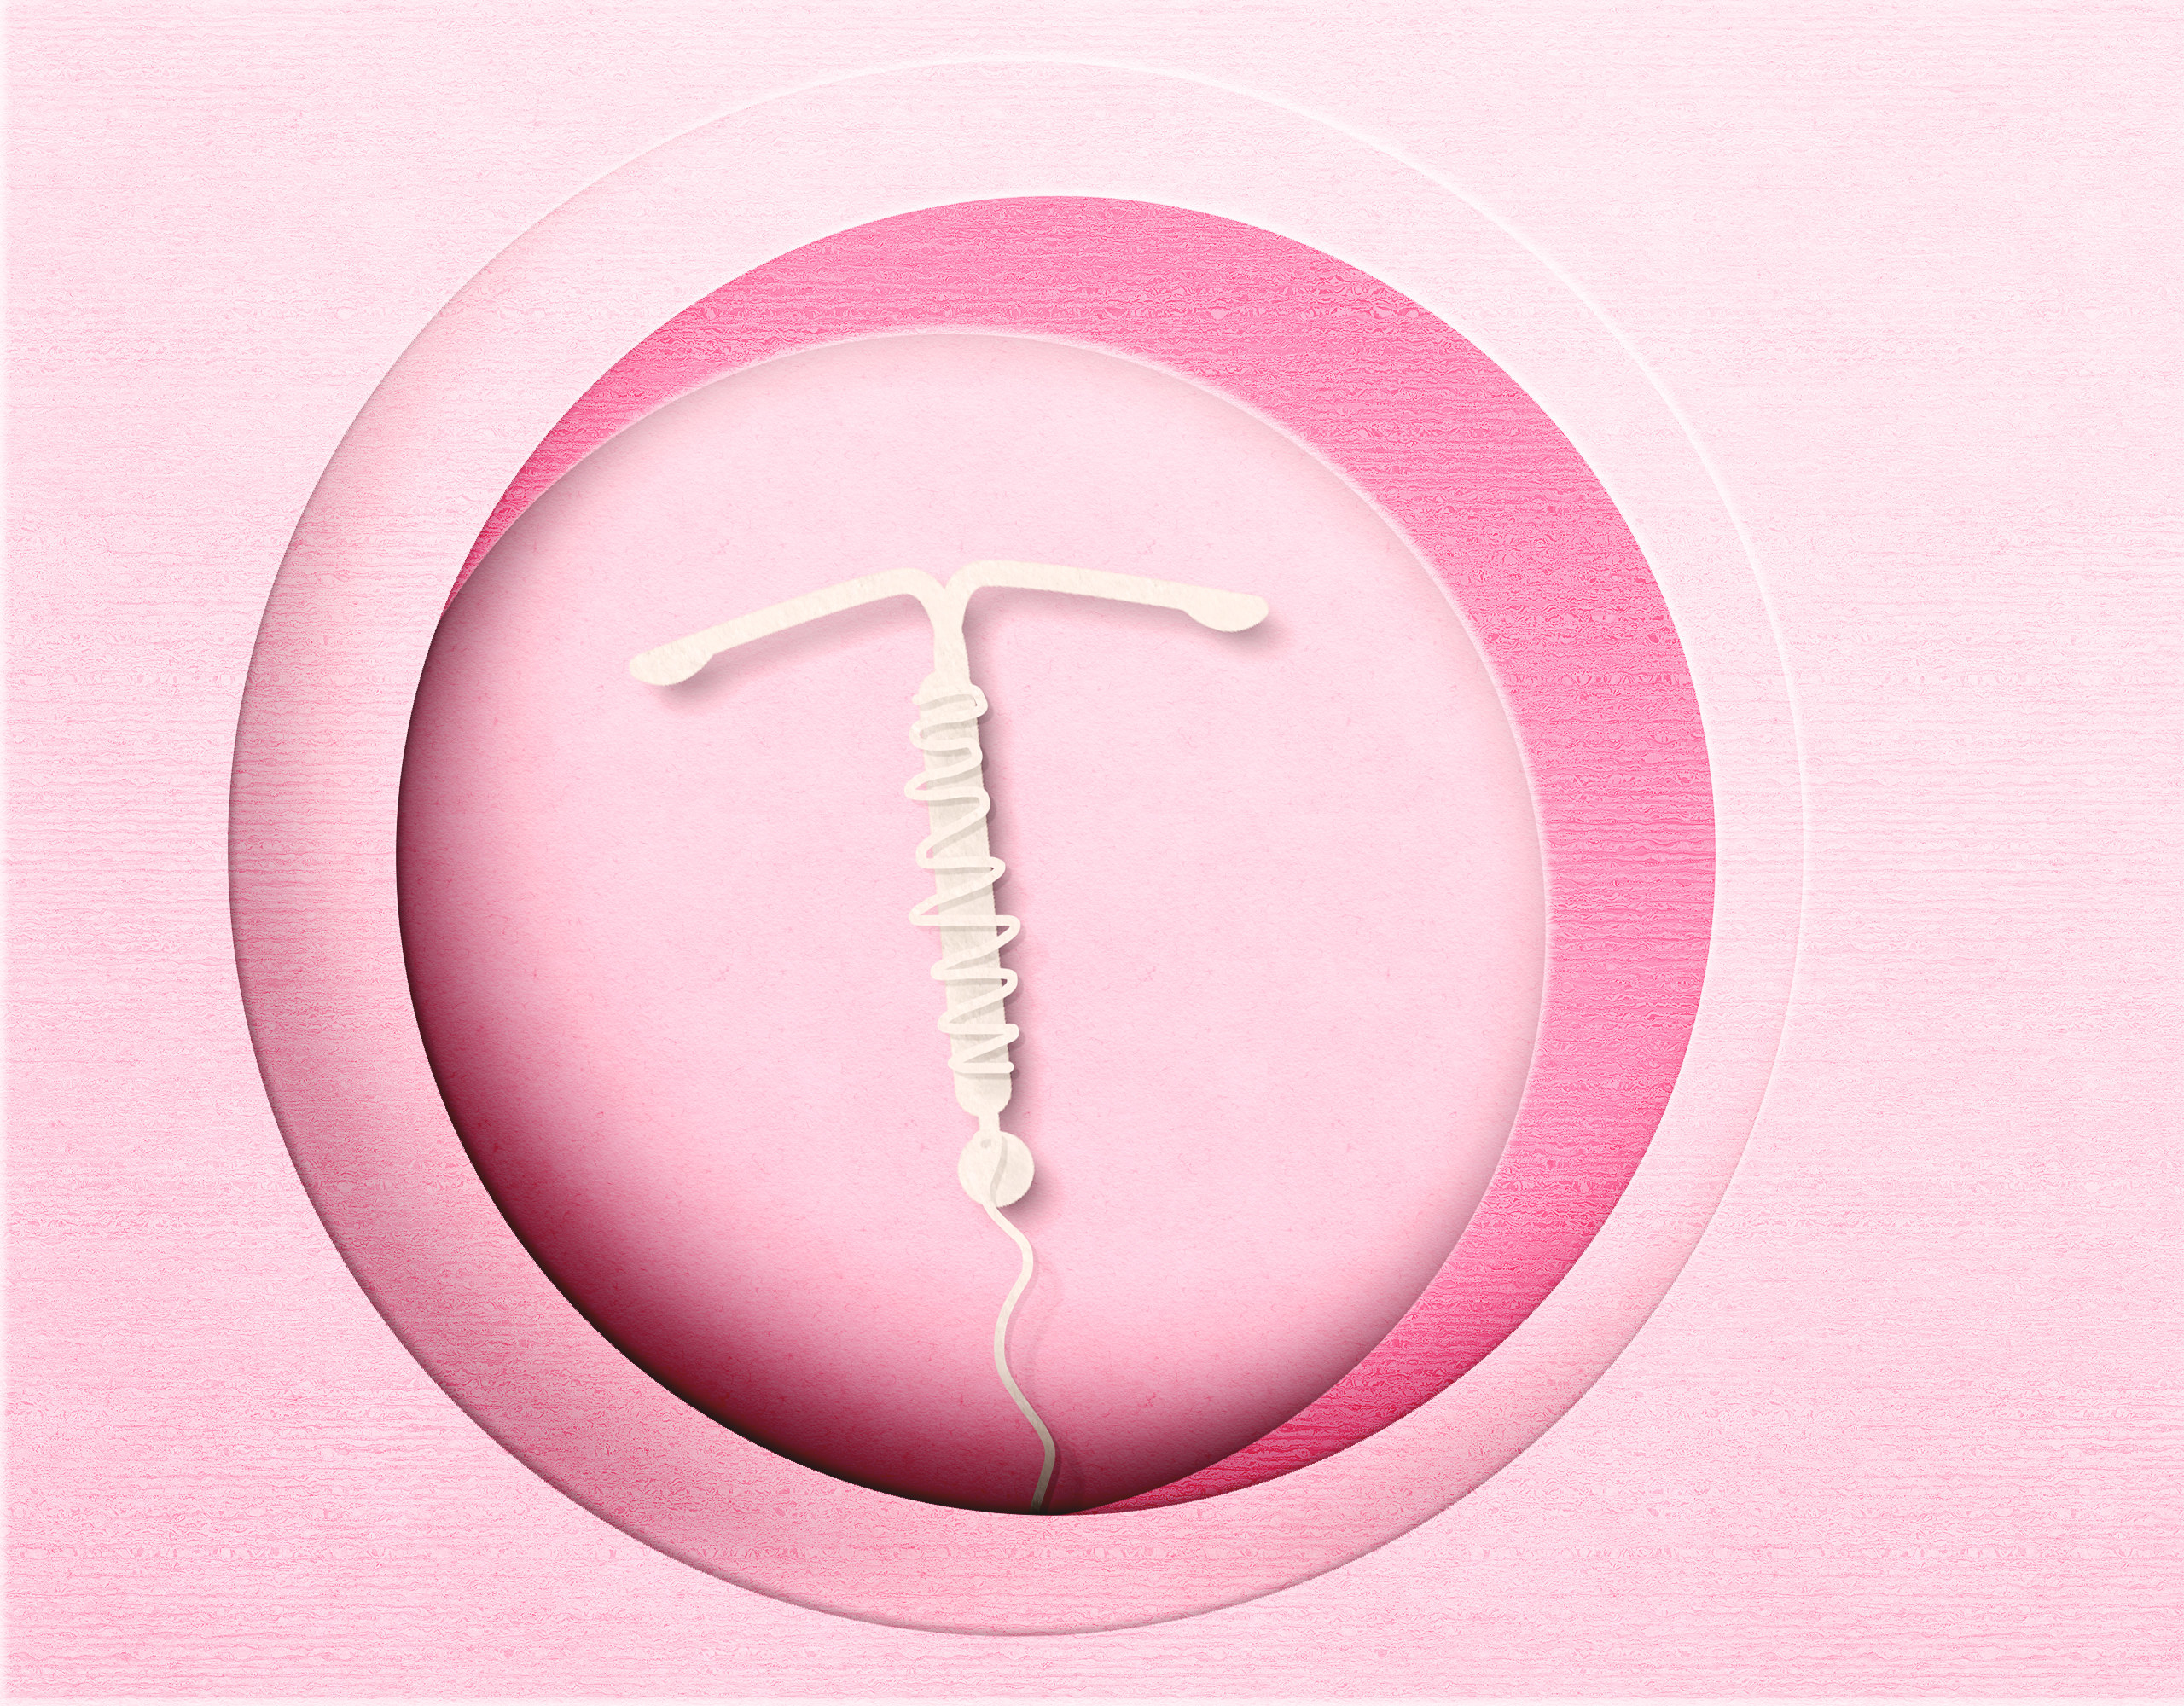 Concept hormonal contraception on a pink background